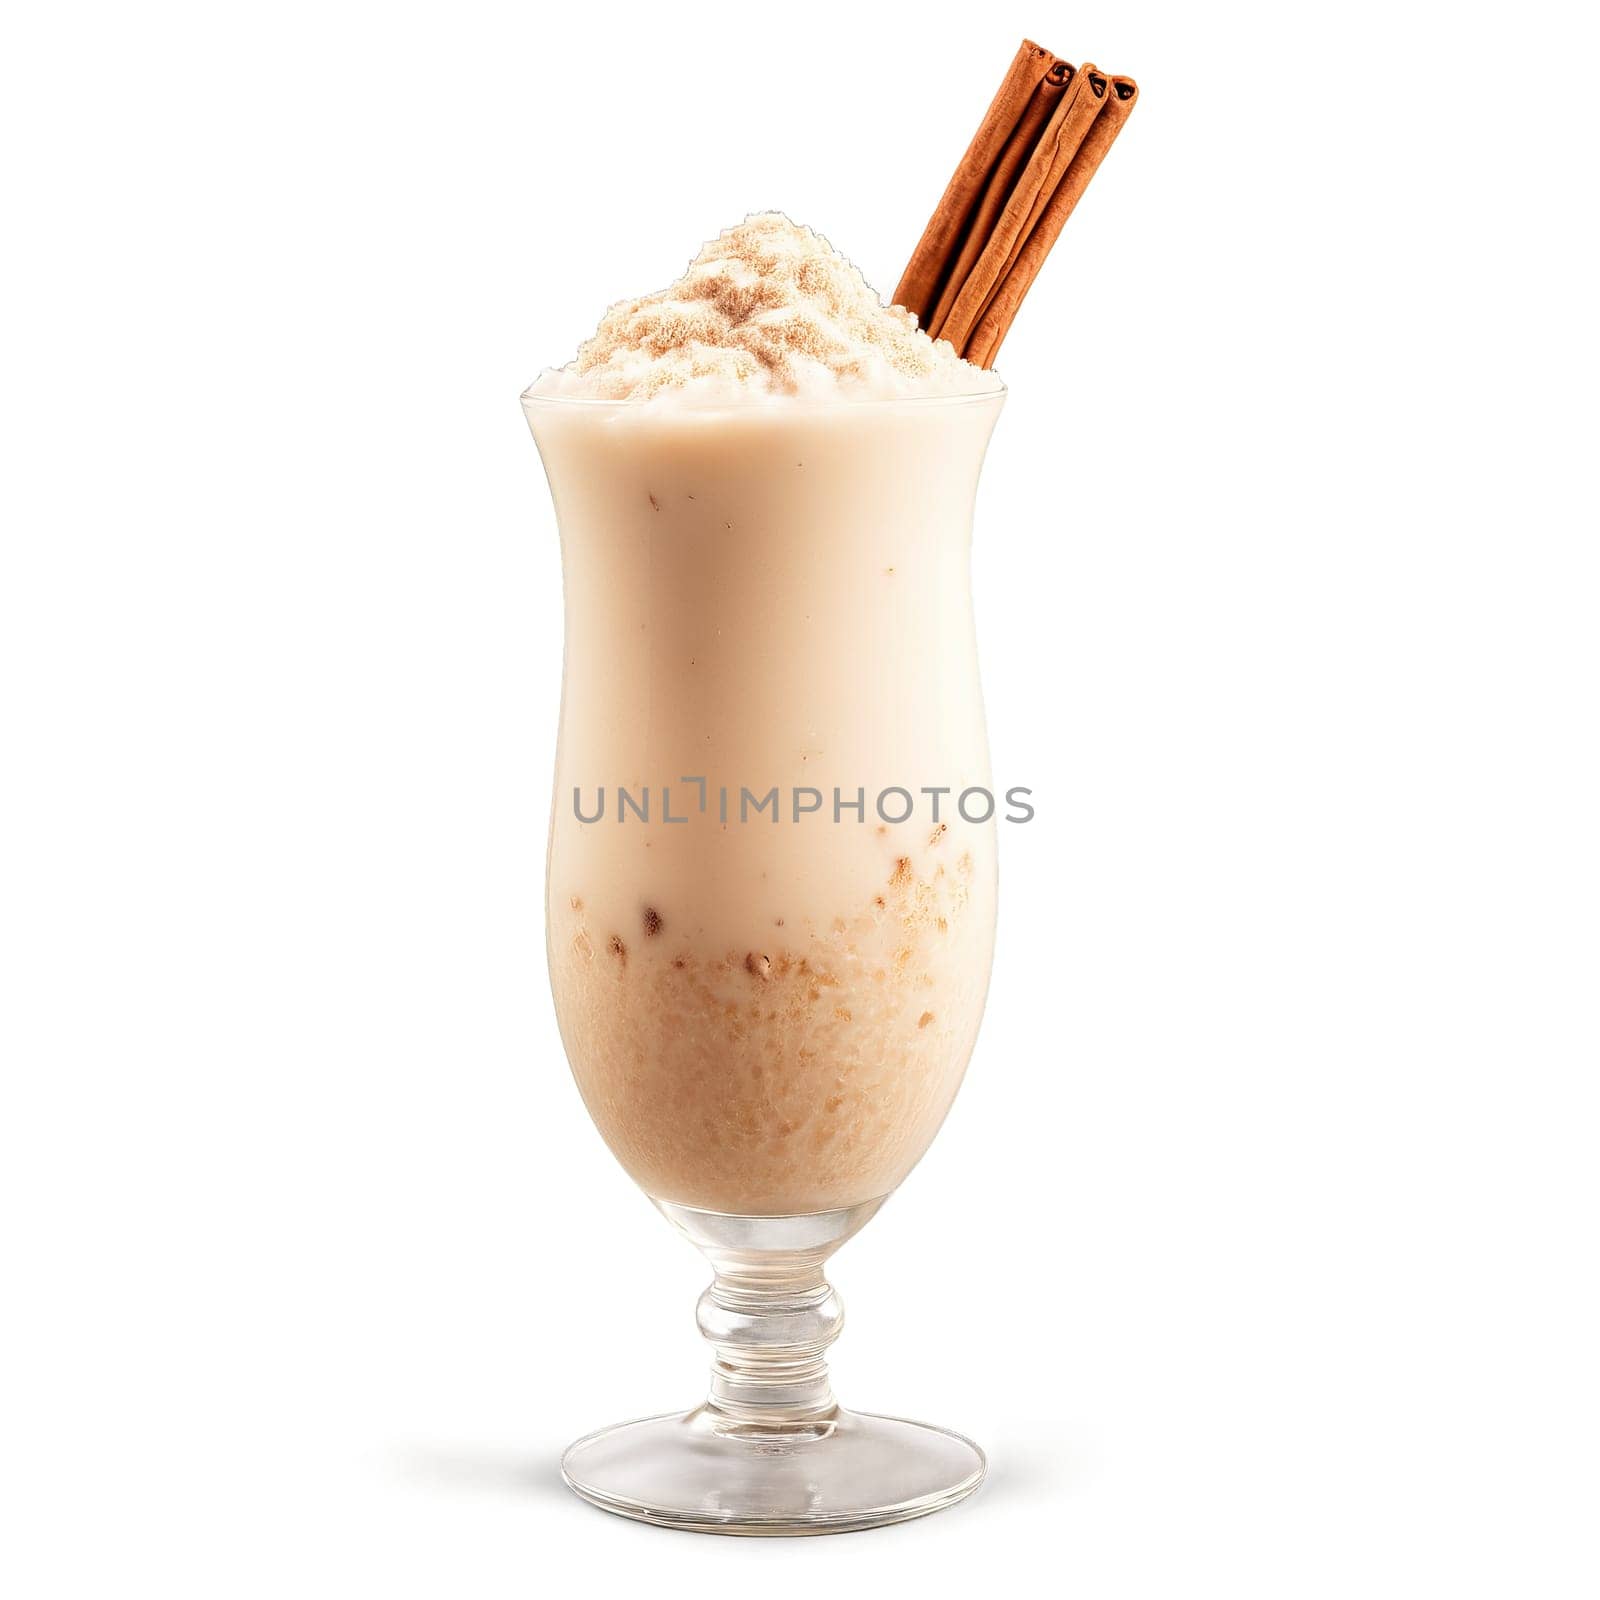 Iced horchata creamy and cinnamon spiced with rice milk and cinnamon powder splashing in. Food isolated on transparent background.